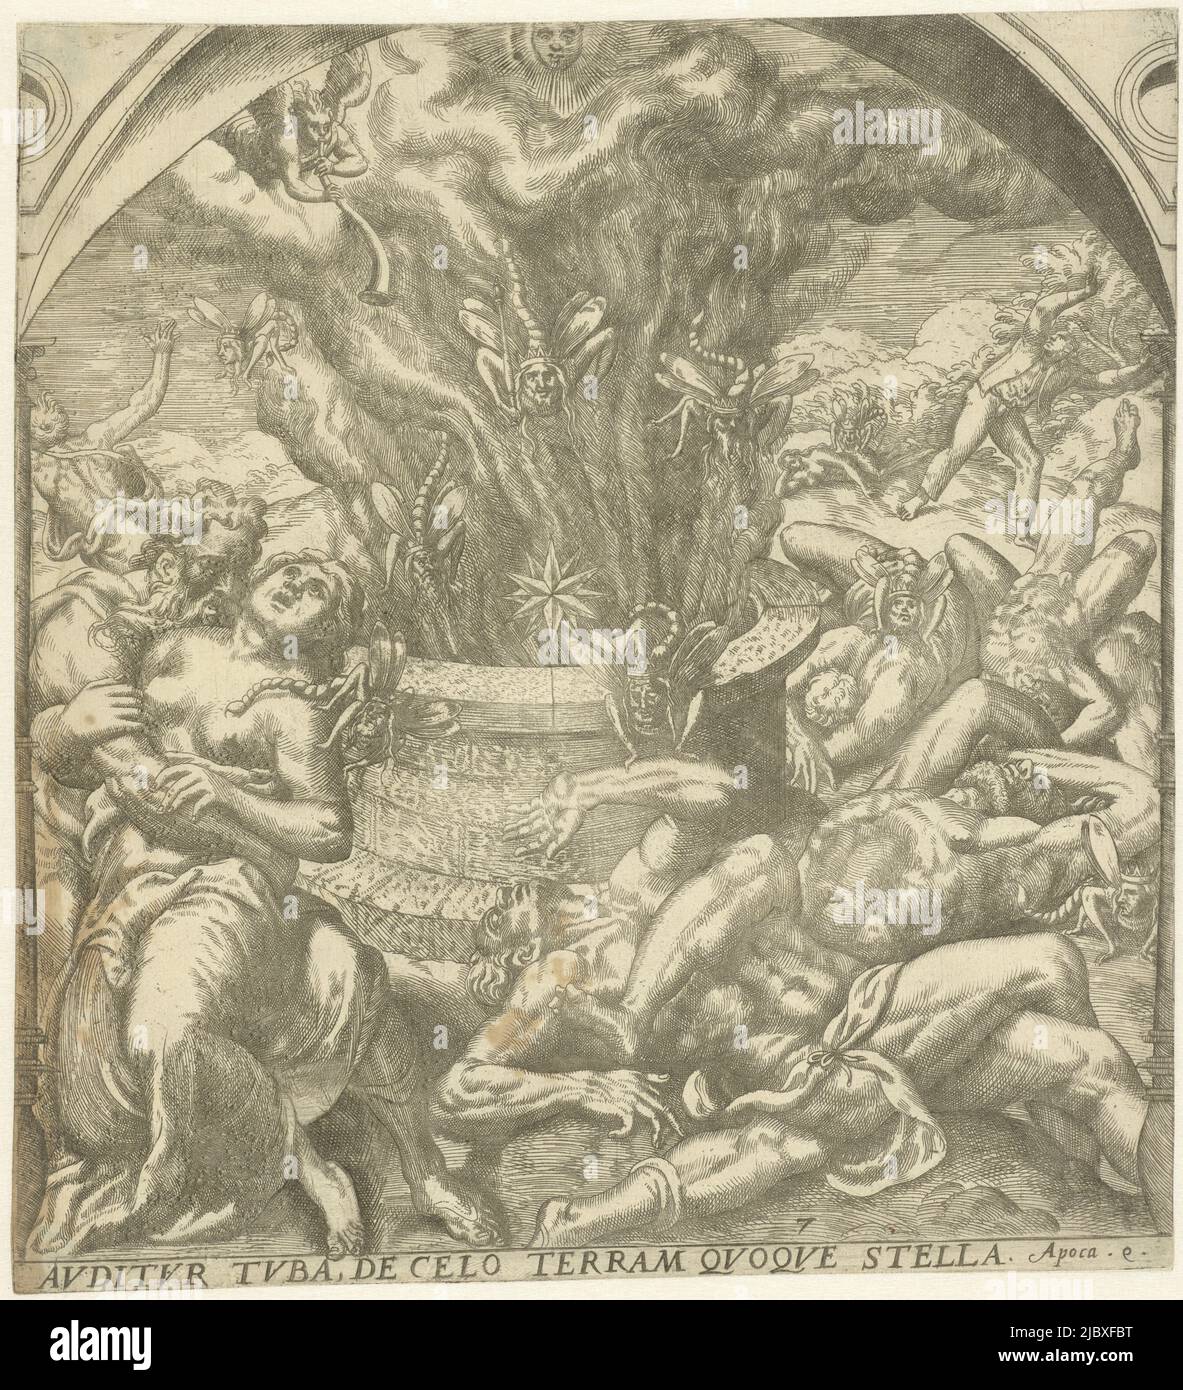 The fifth angel flies through the air and blows his trumpet. From a well in the foreground comes a dark cloud that darkens the sun. Numerous monstrous locusts with crowned human heads also emerge from the well. They stab people with their scorpion tails, Grasshopper plague after the fifth trumpet blast Avditvr tvba, the celo terram qvoqve stella, Revelation of John (series title)., print maker: Gerard van Groeningen, Antwerp, 1563 - 1574, paper, etching, engraving, h 267 mm × w 246 mm Stock Photo